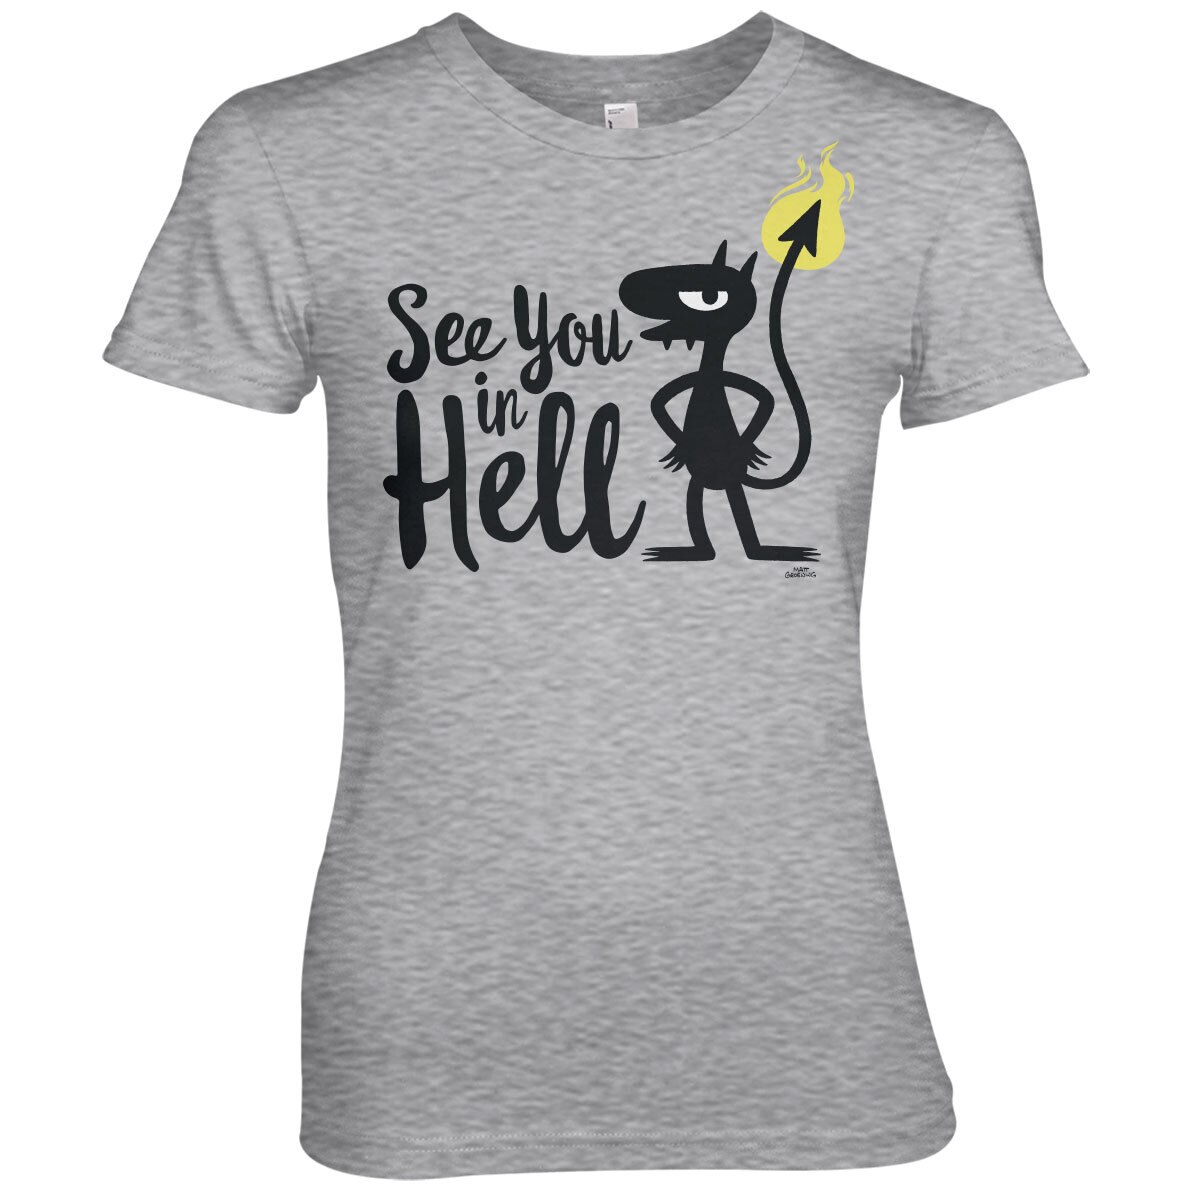 Luci - See You In Hell Girly Tee